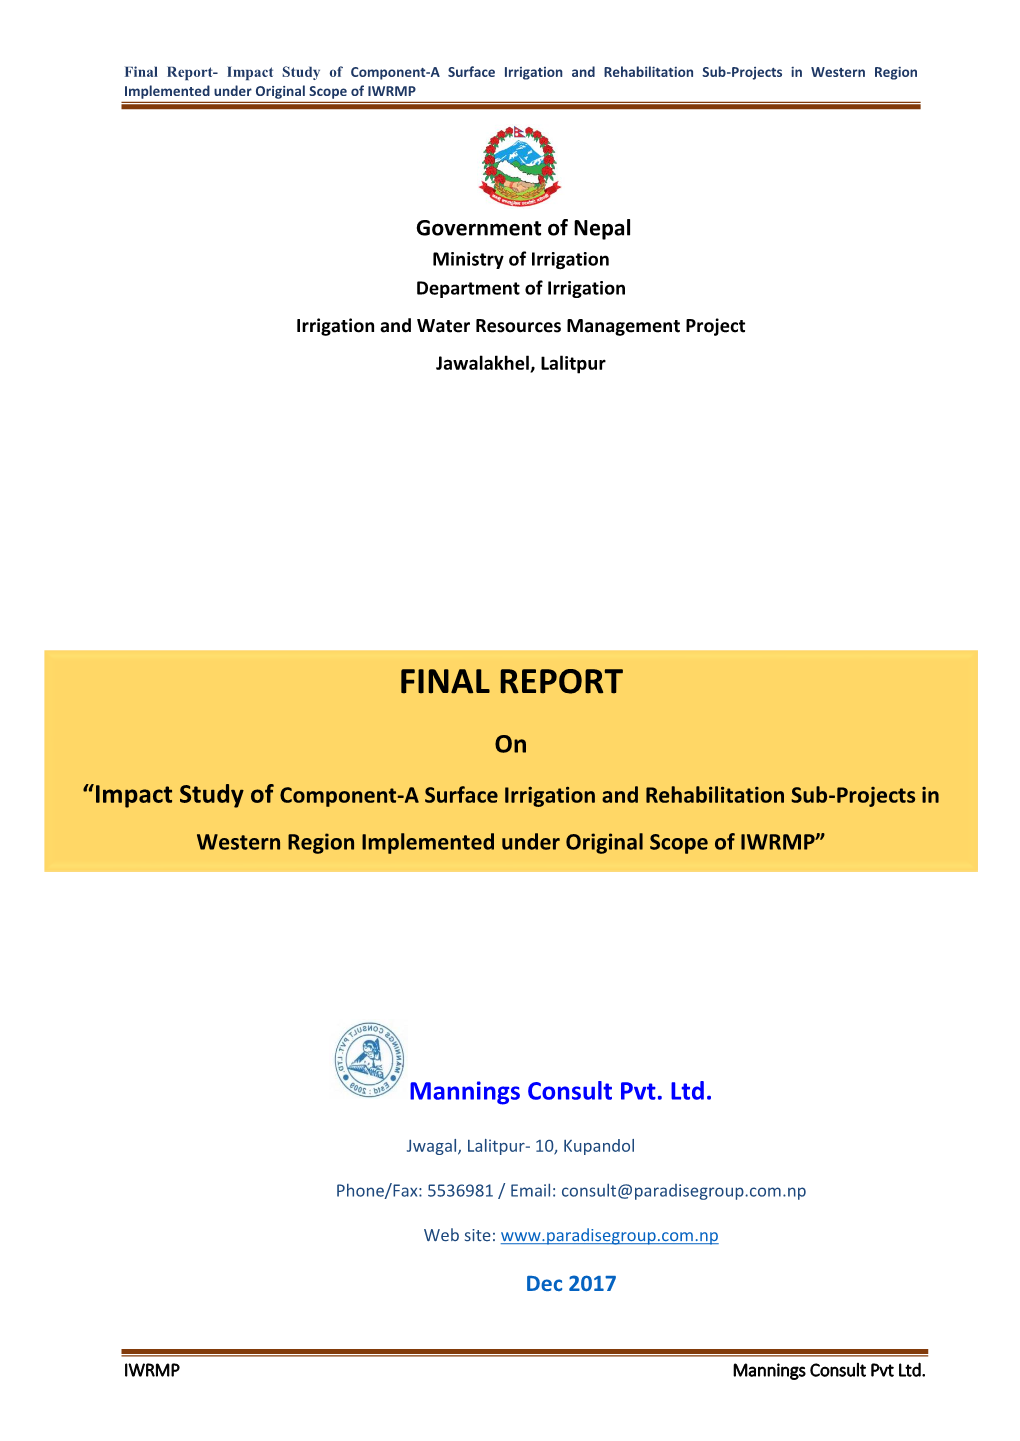 Final Report- Impact Study of Component-A Surface Irrigation and Rehabilitation Sub-Projects in Western Region Implemented Under Original Scope of IWRMP